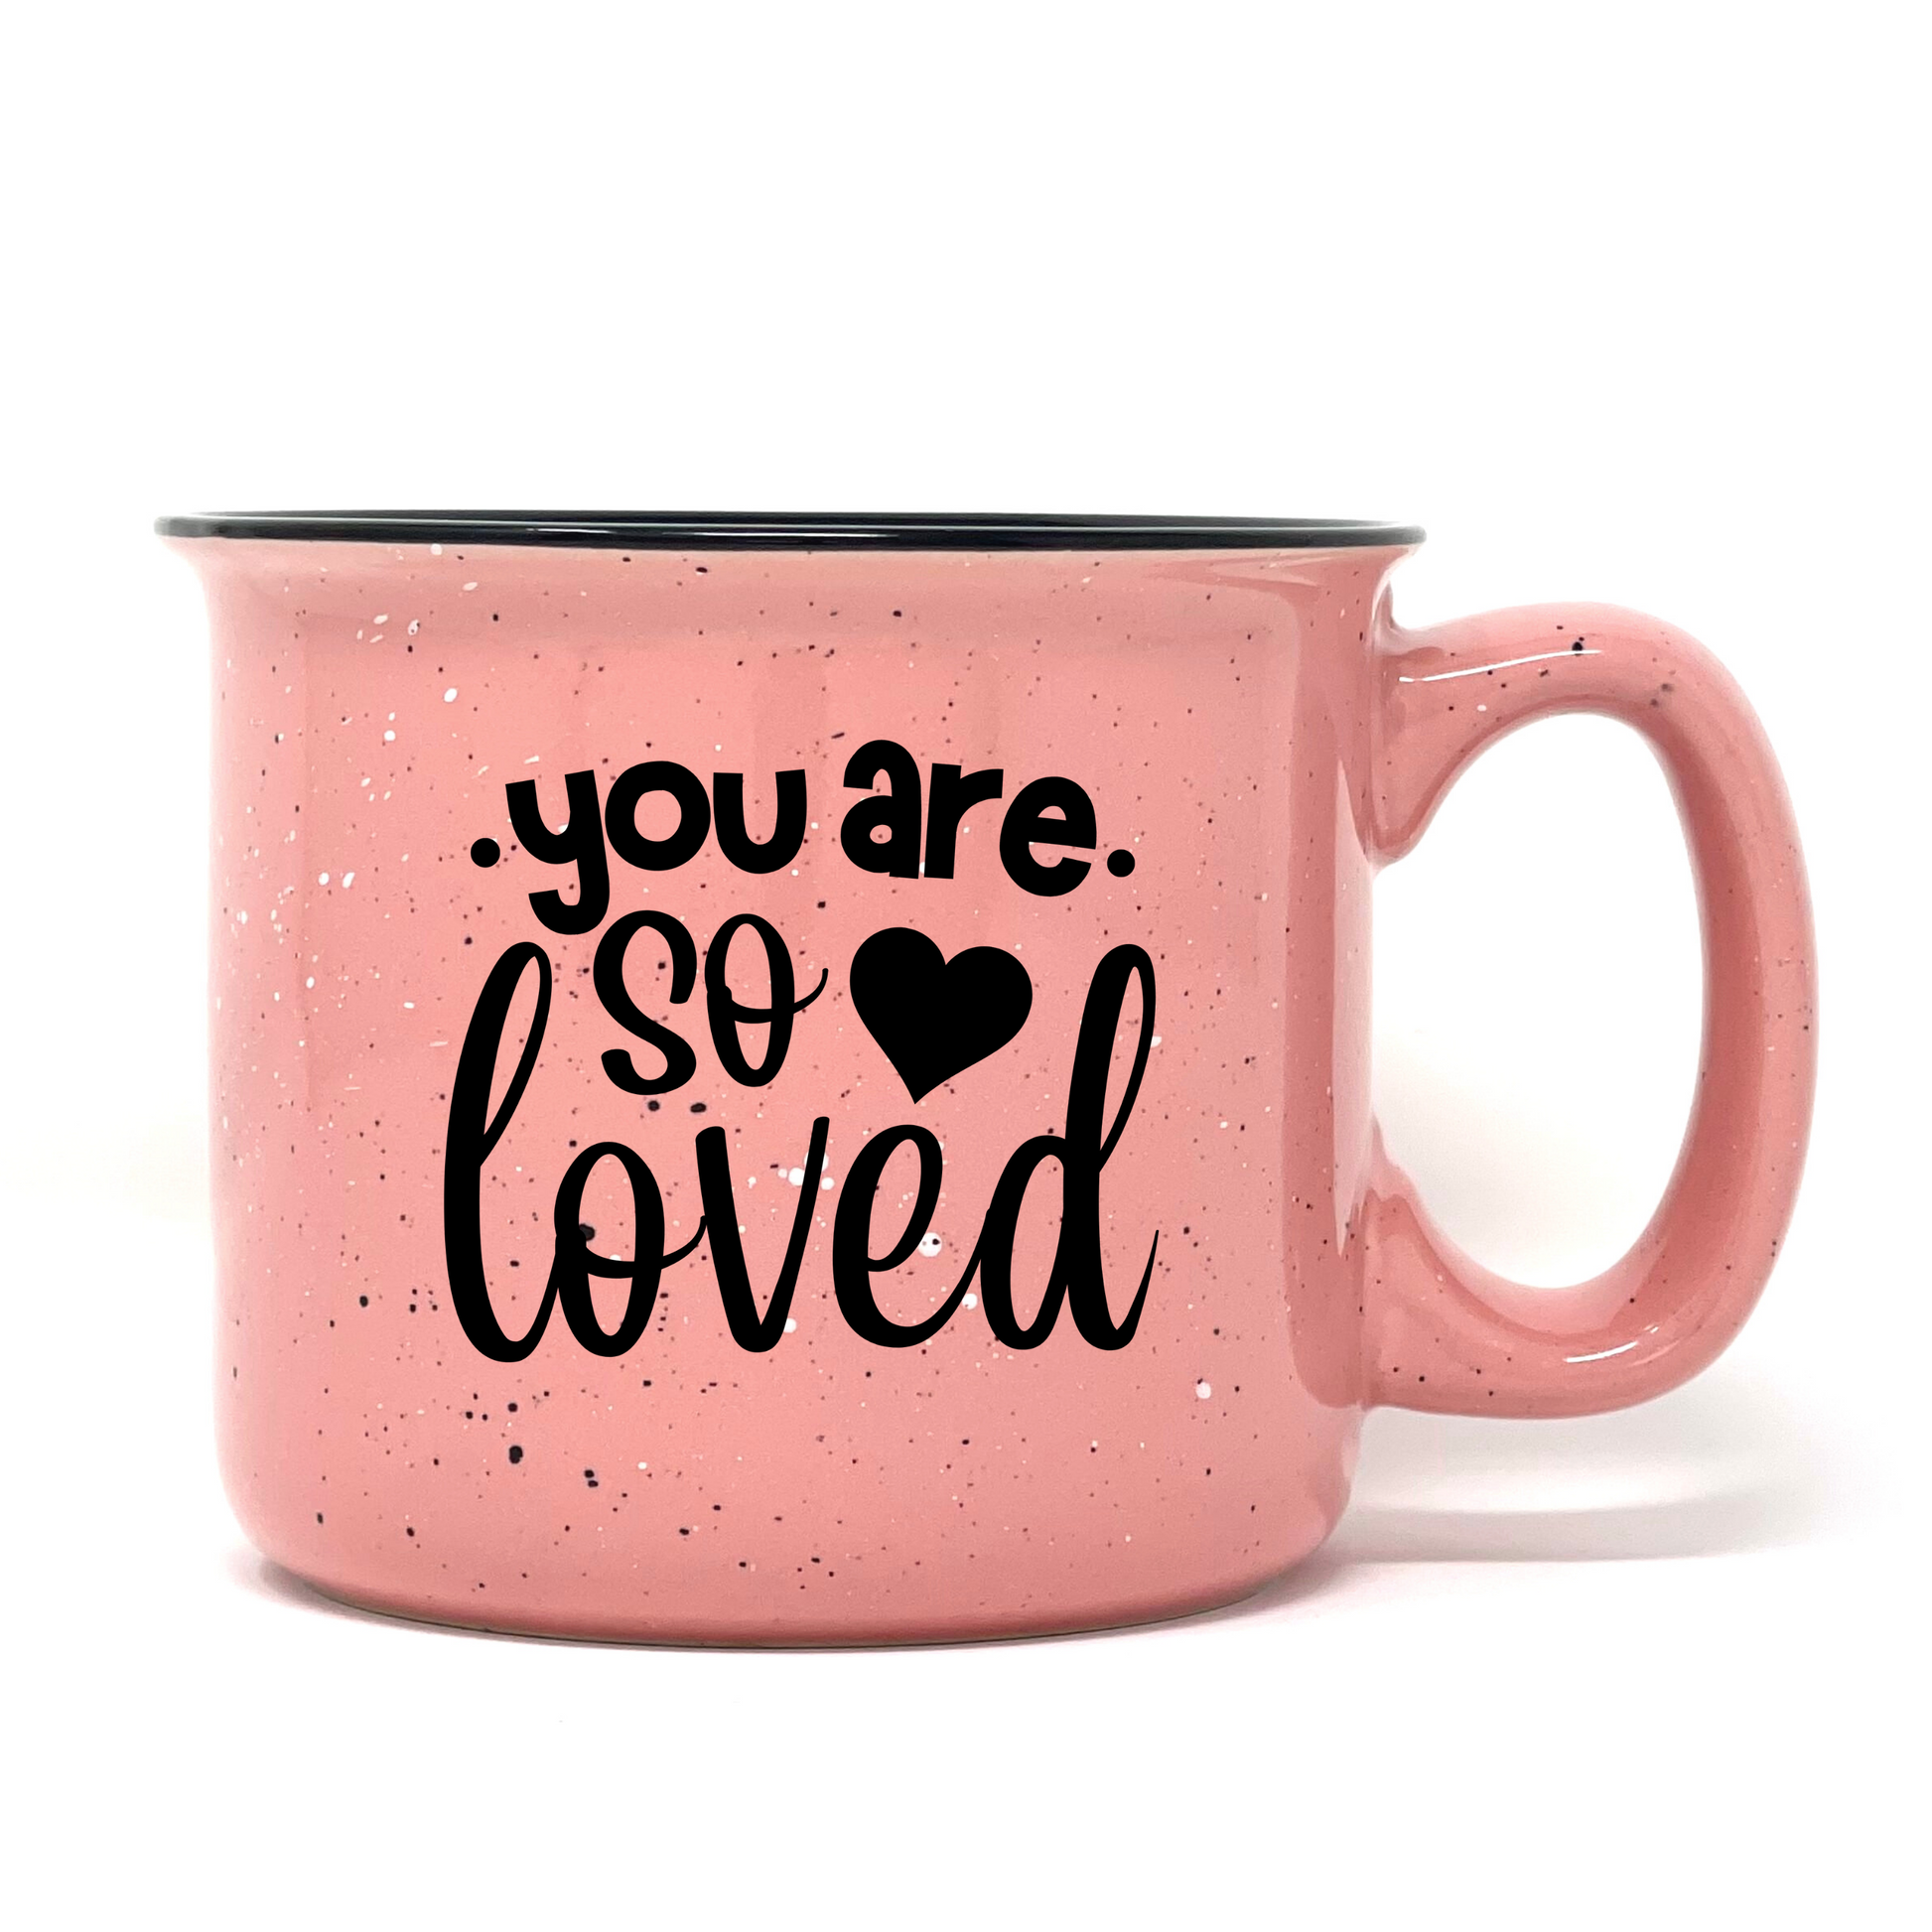 4 super chic coffee cups under $25 that TikTokers love